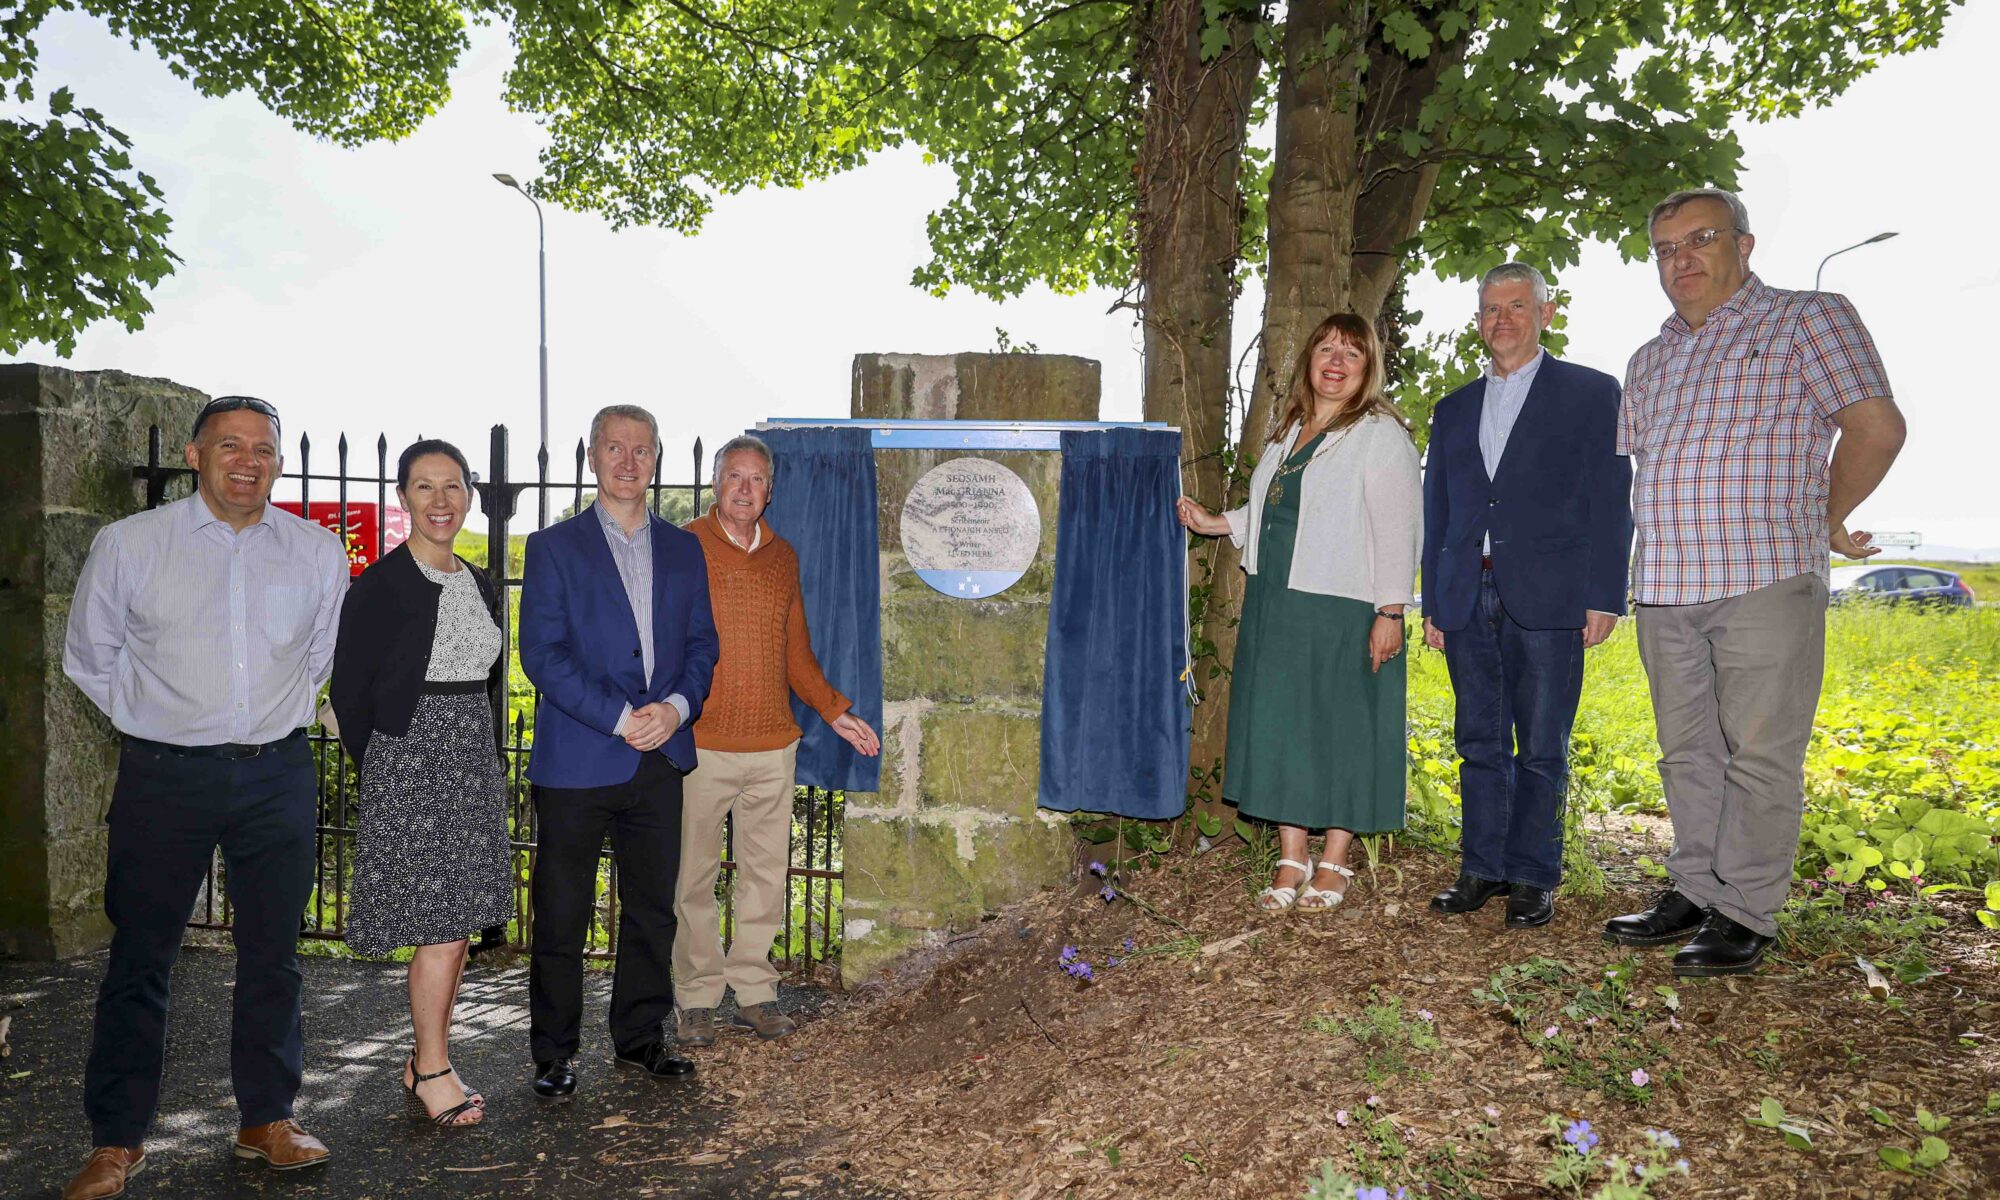 Photograph of the plaque unveiling